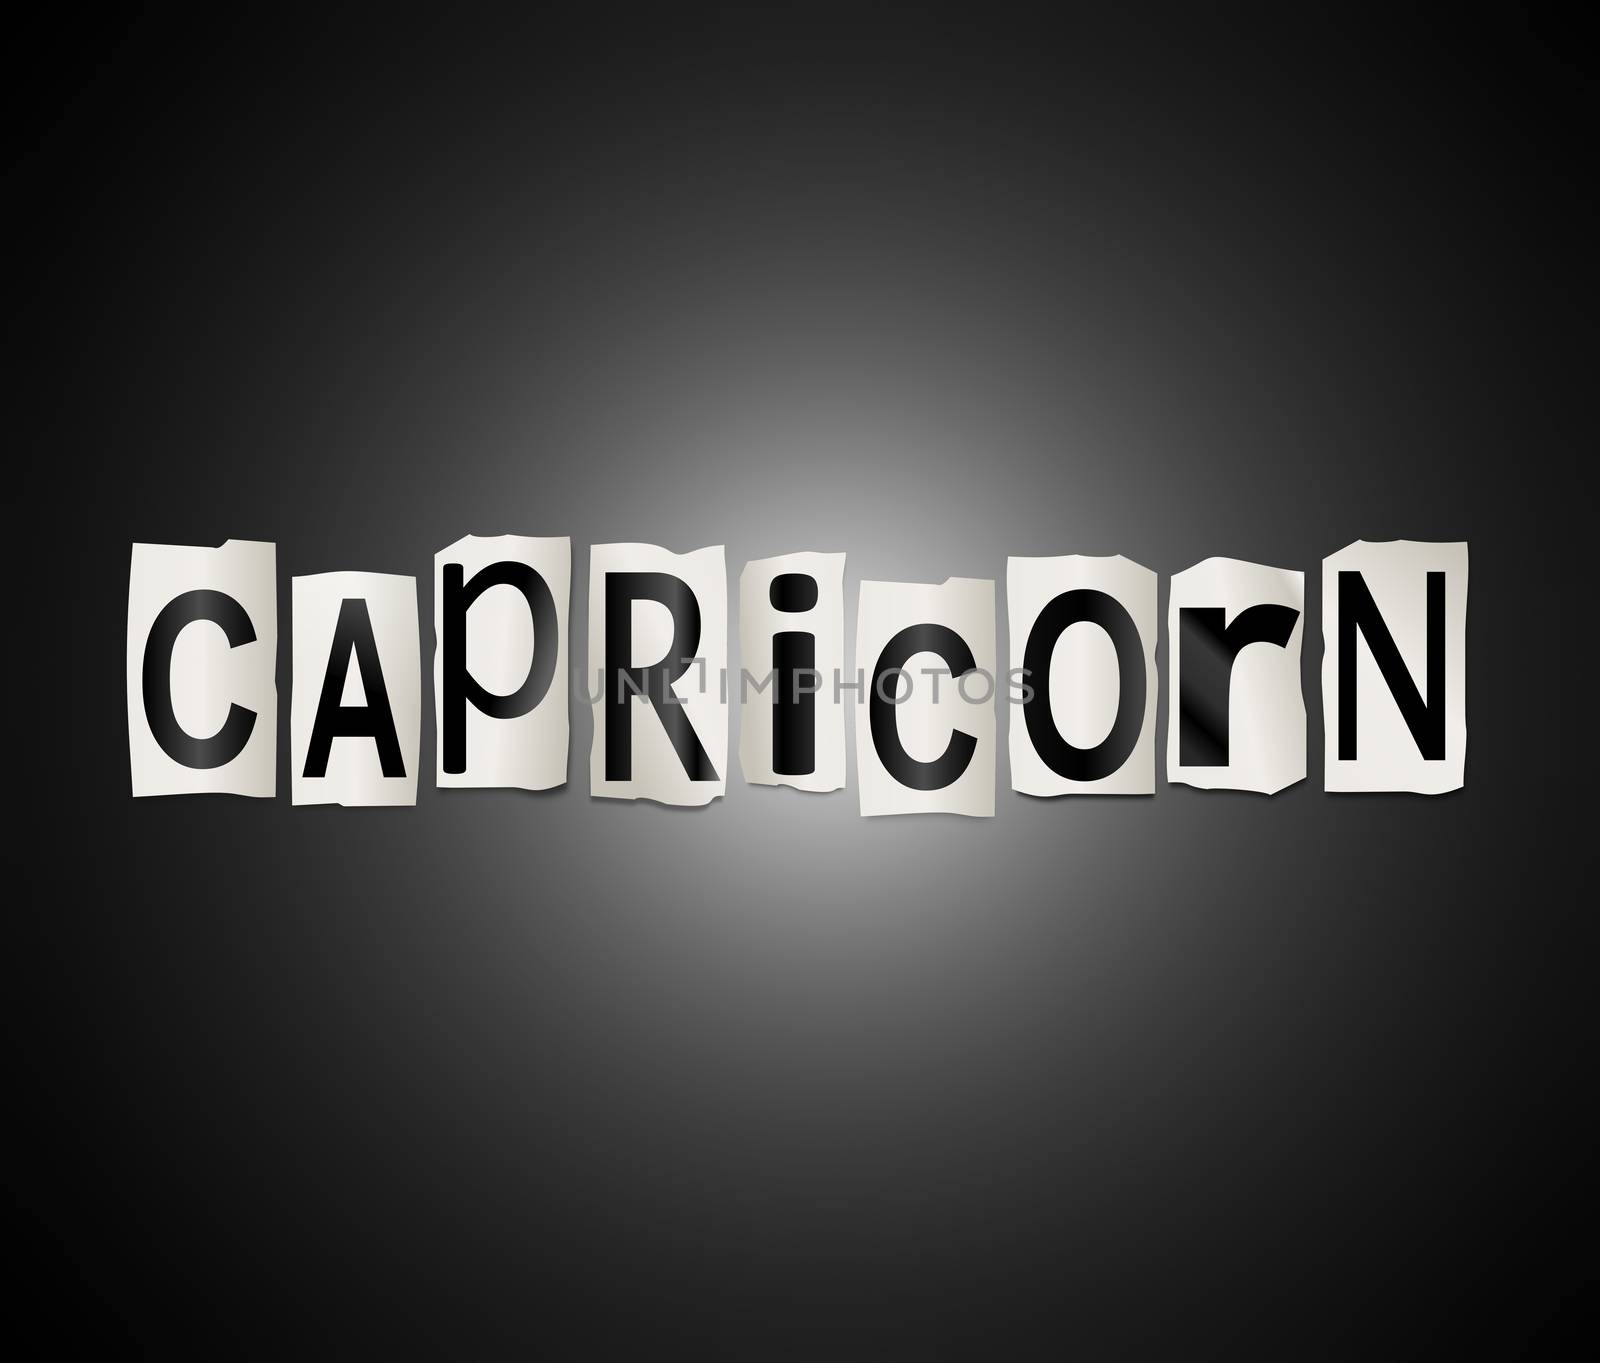 Illustration depicting a set of cut out printed letters arranged to form the word capricorn.